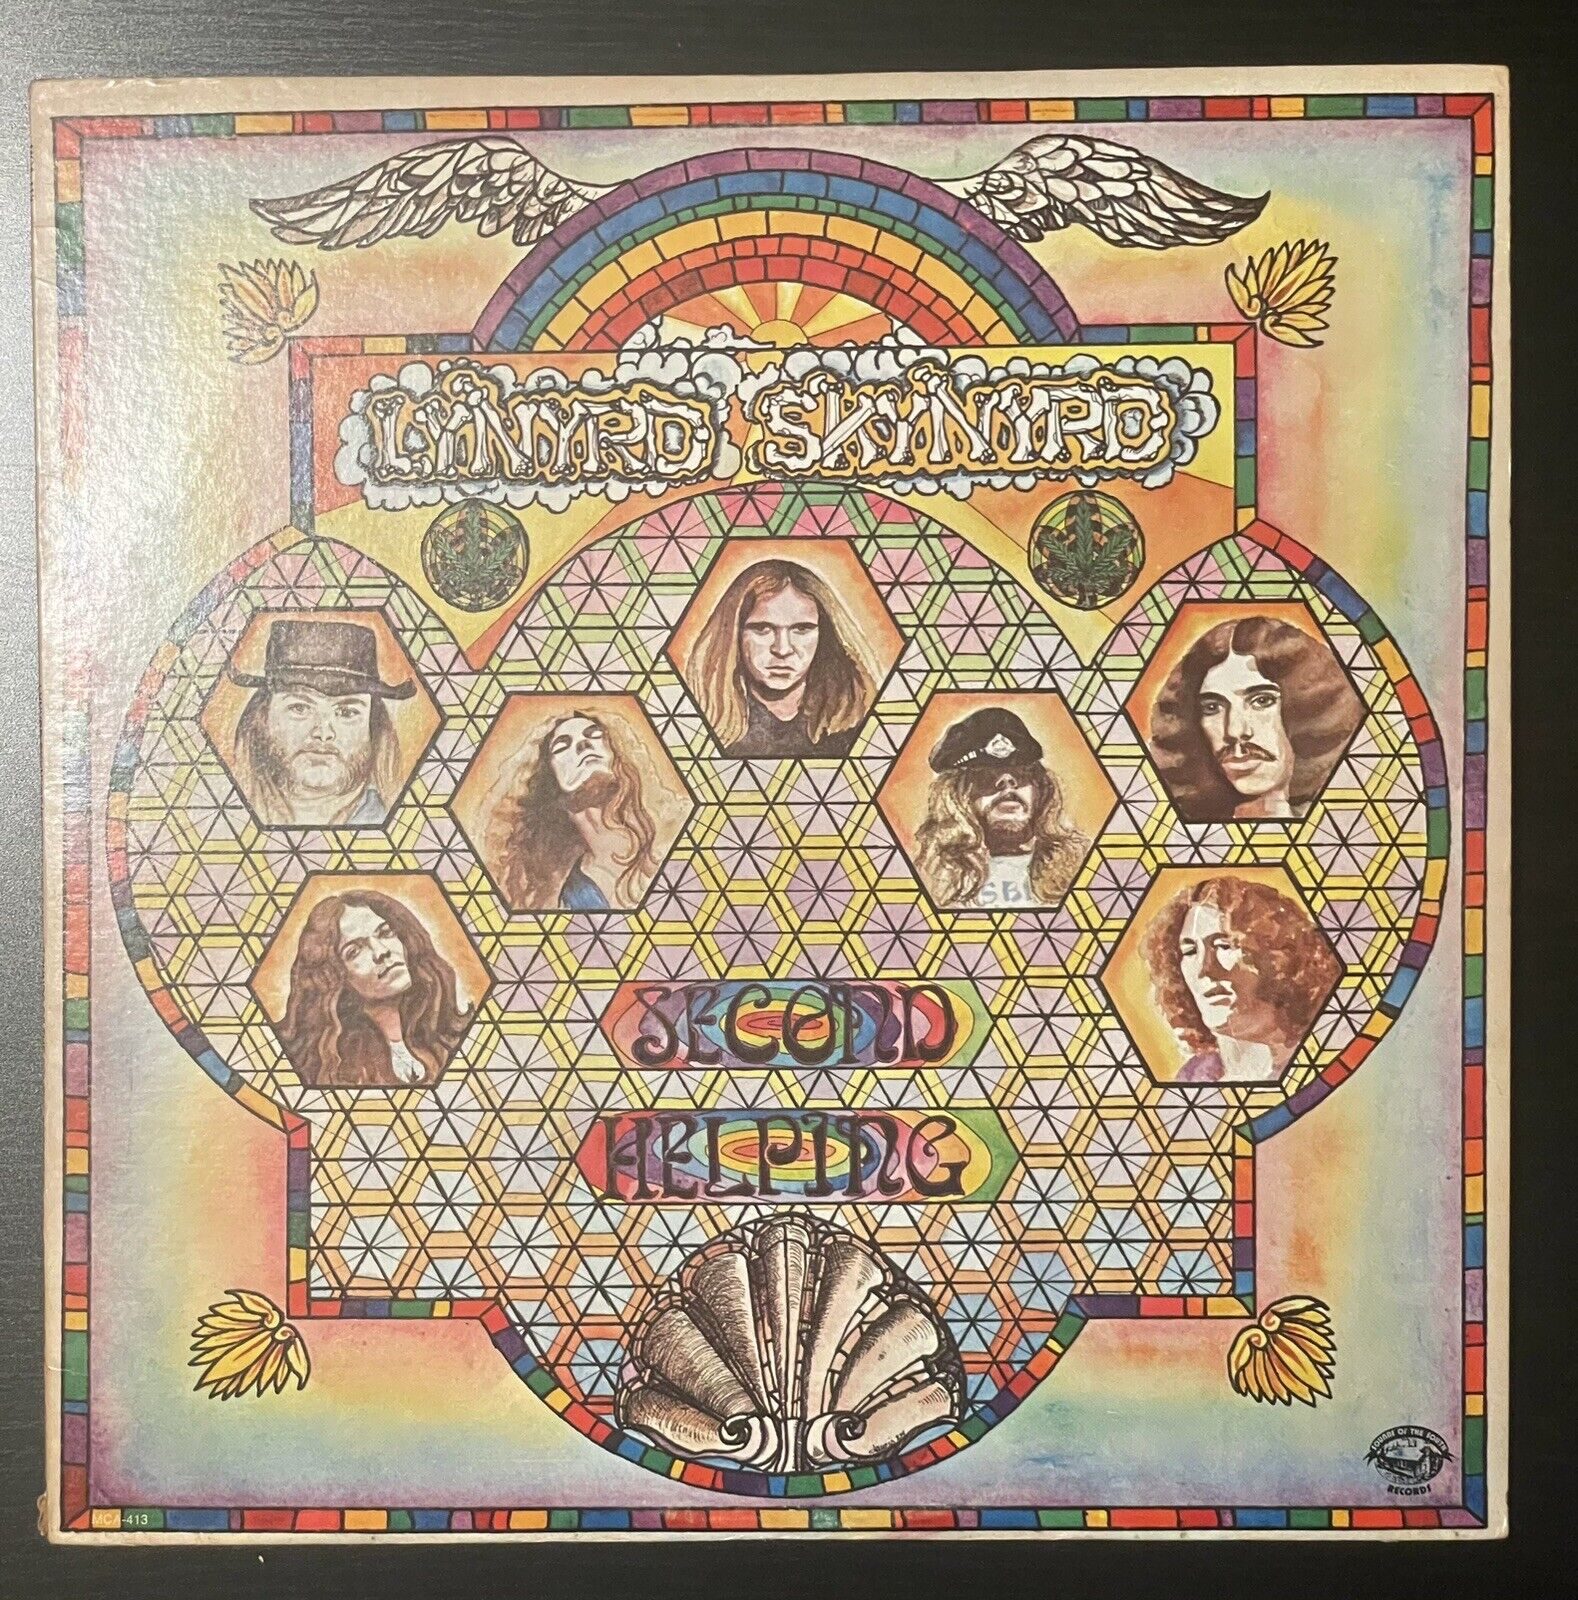 Lynyrd Skynyrd Second Helping 1974 LP Sounds of the South Yellow Label MCA-413